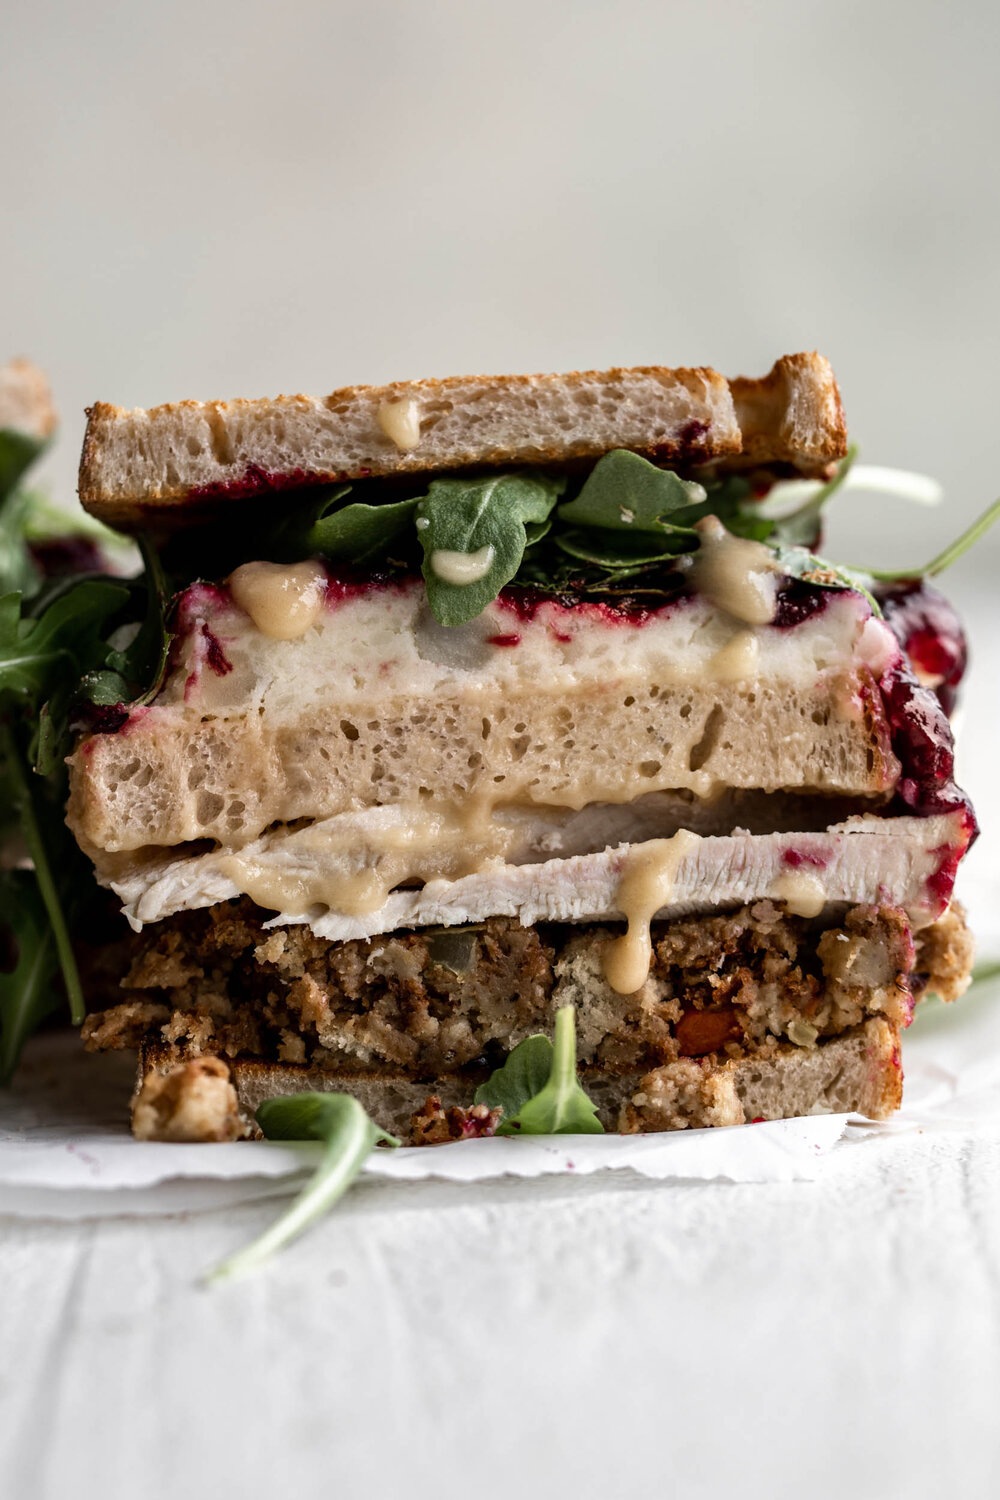 Thanksgiving Leftover sandwich the Moistmaker Sandwich (from Friends the tv show) with a middle slice of bread soaked in gravy, cranberry sauce, mashed potatoes, stuffing, turkey and arugula